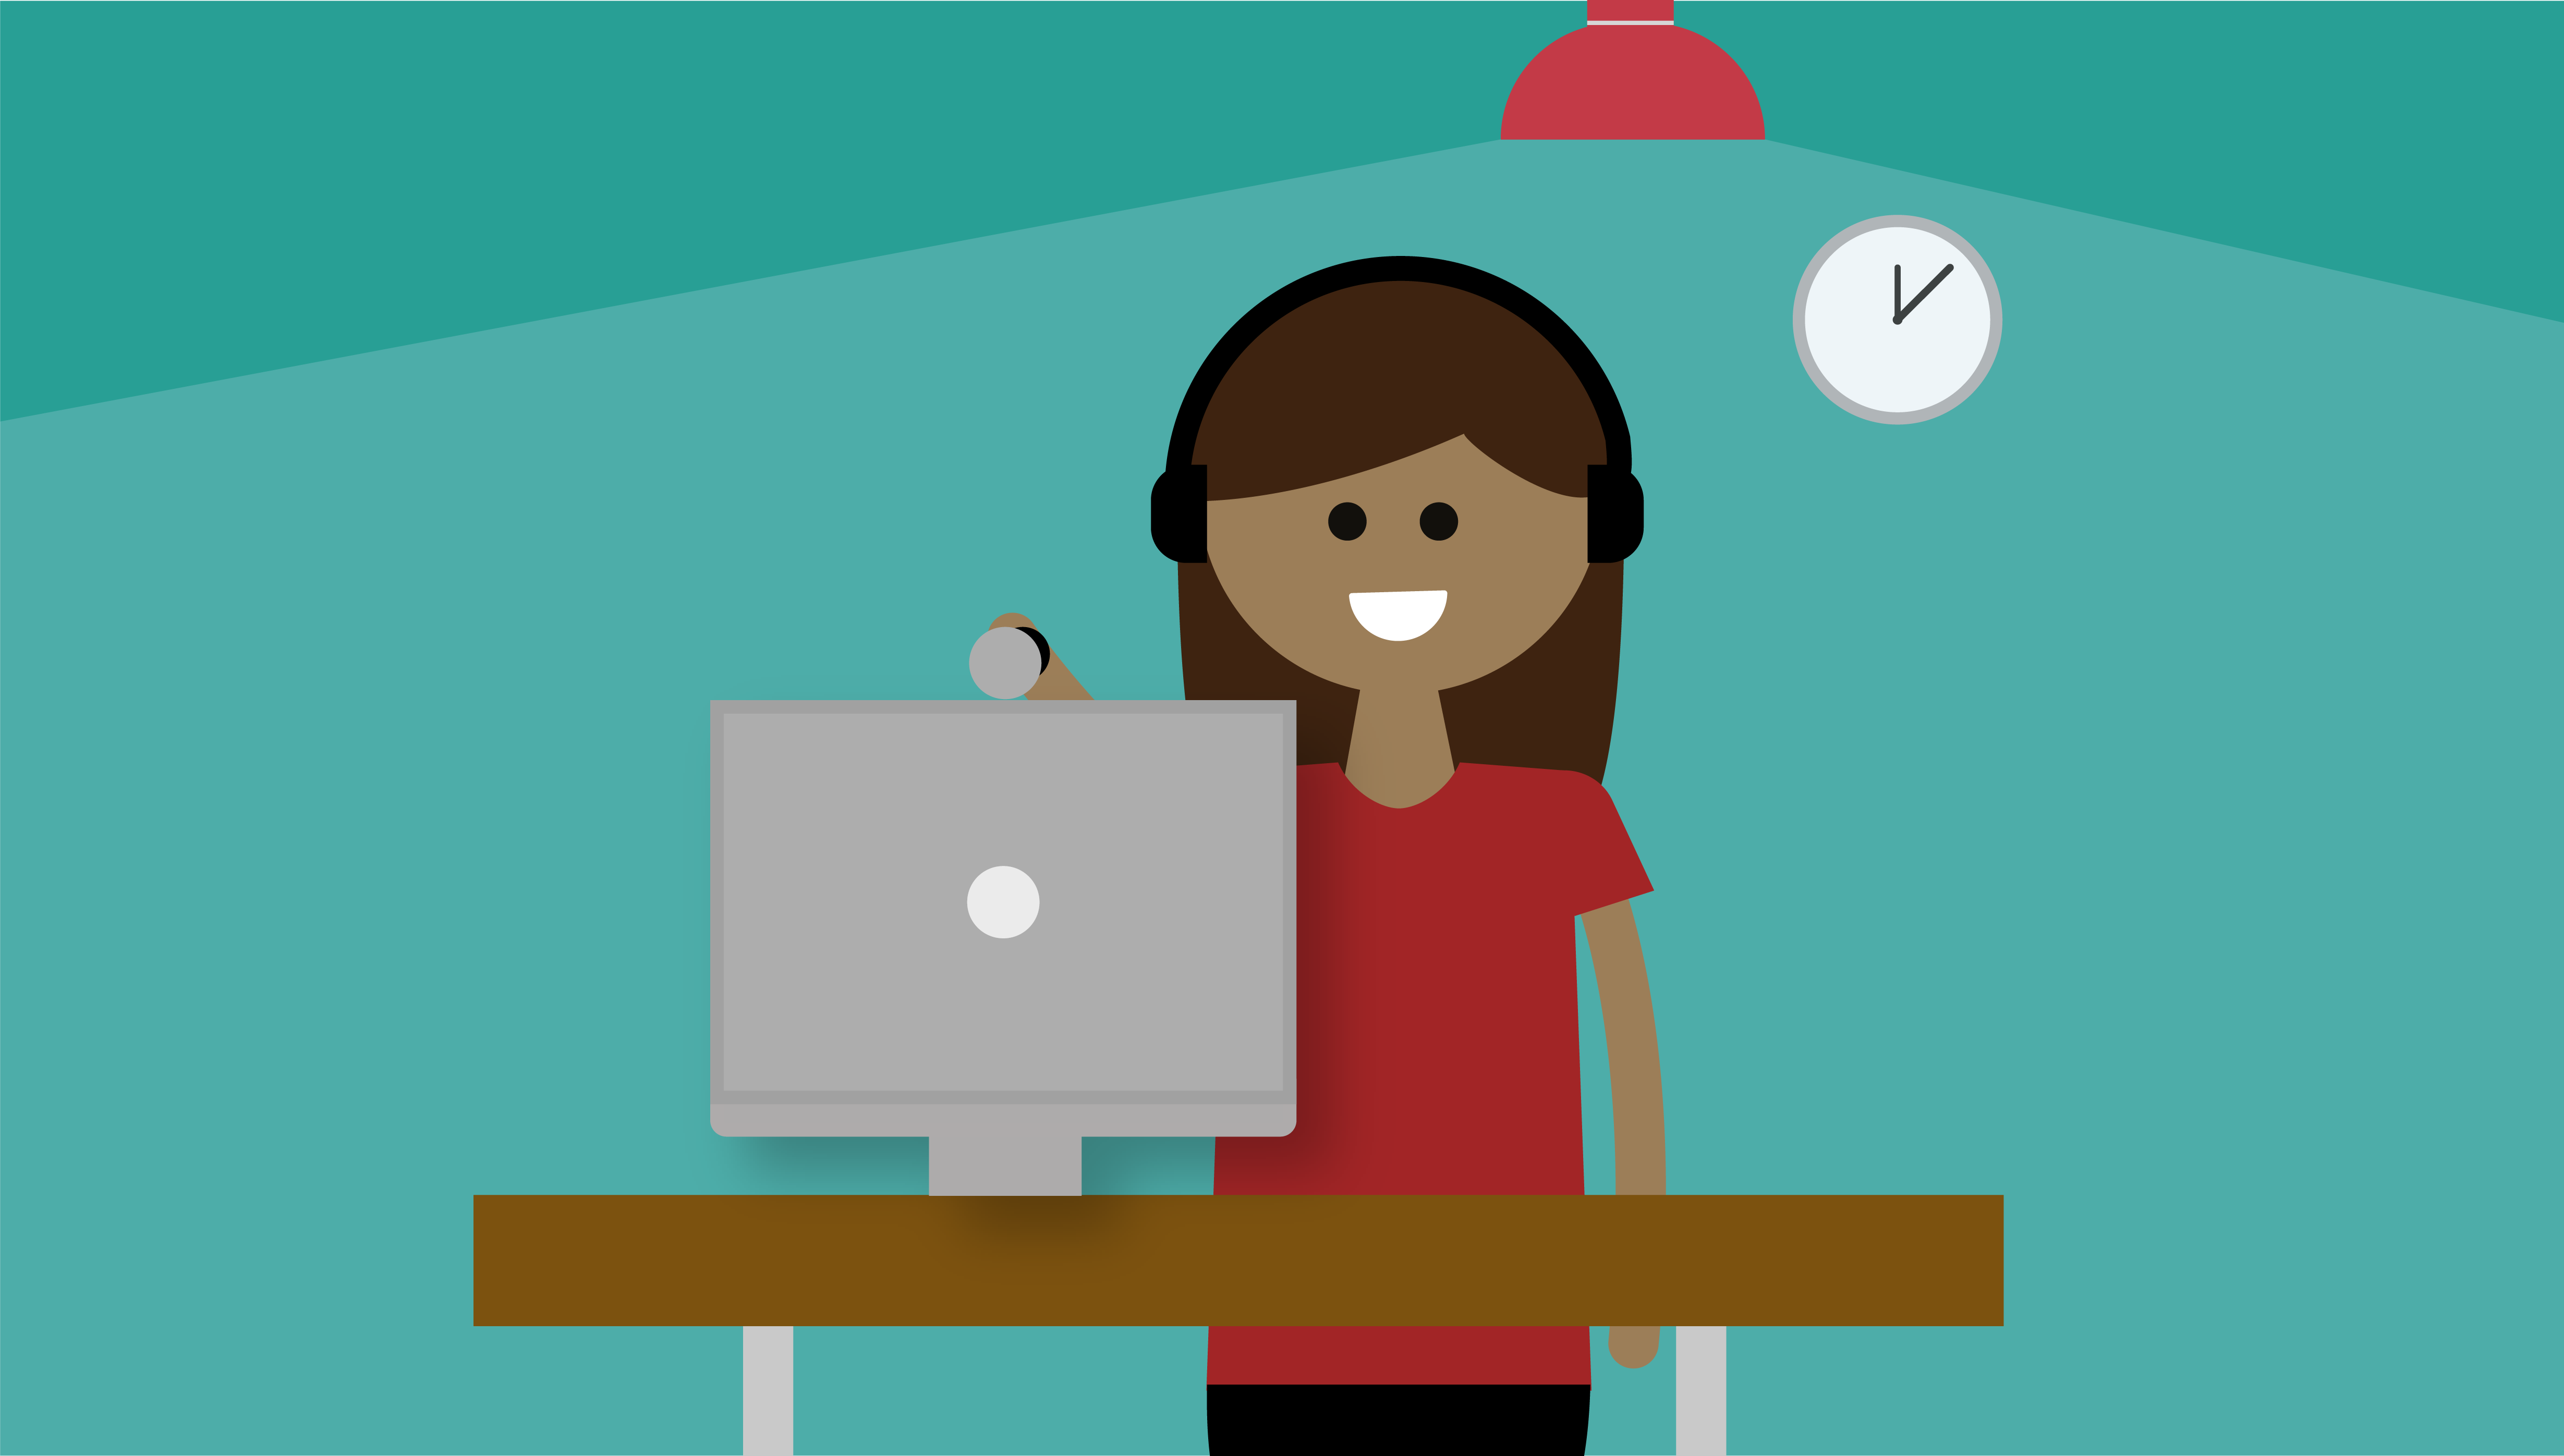 Illustrated graphic of a person smiling into their webcam at a computer desk